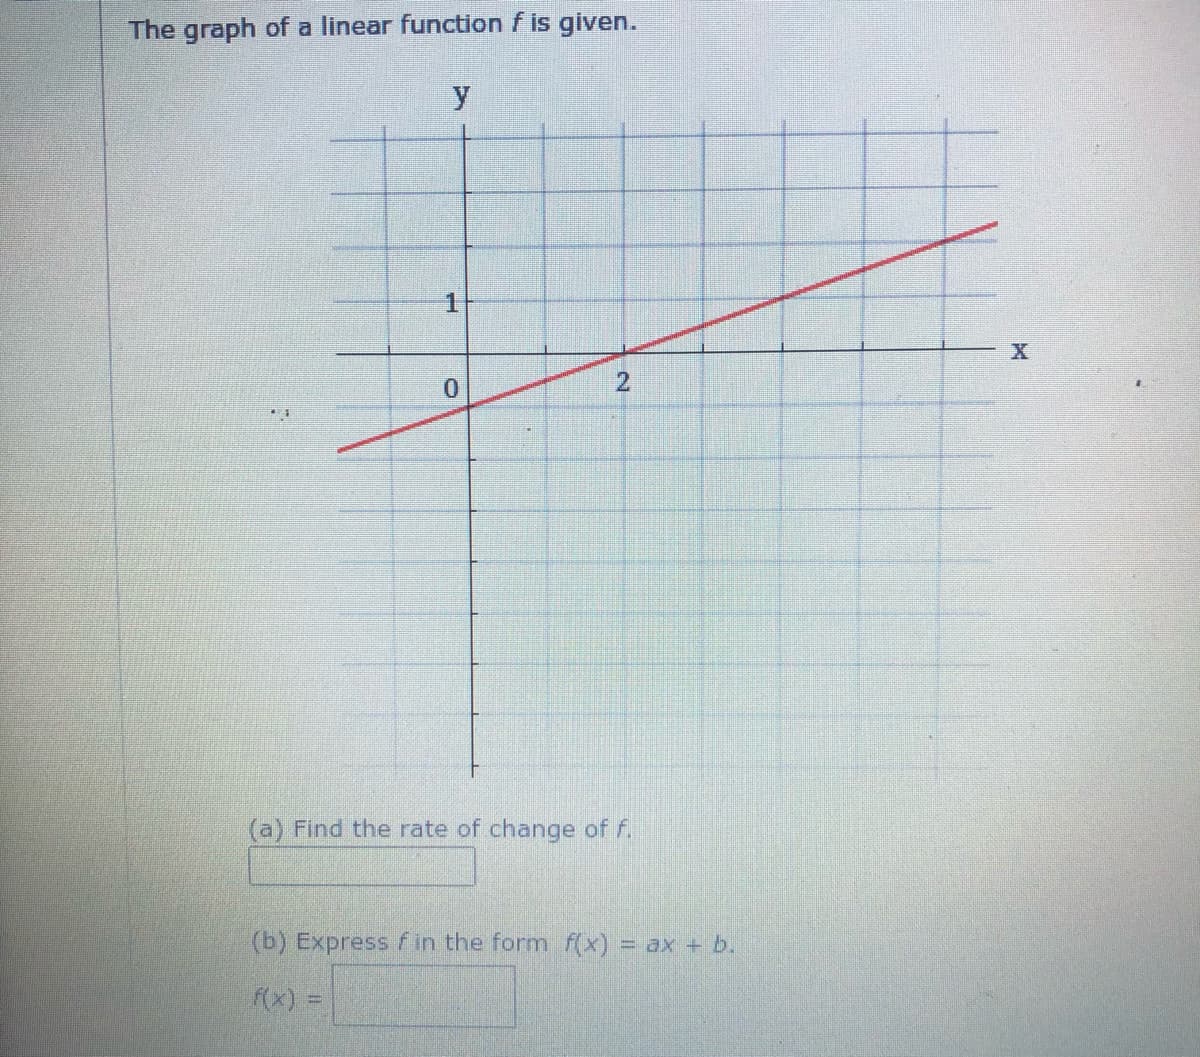 The graph of a linear function f is given.
a) Find the rate of change of f.
(b) Expressfin the form f(x) = ax + b.
f(x) =
